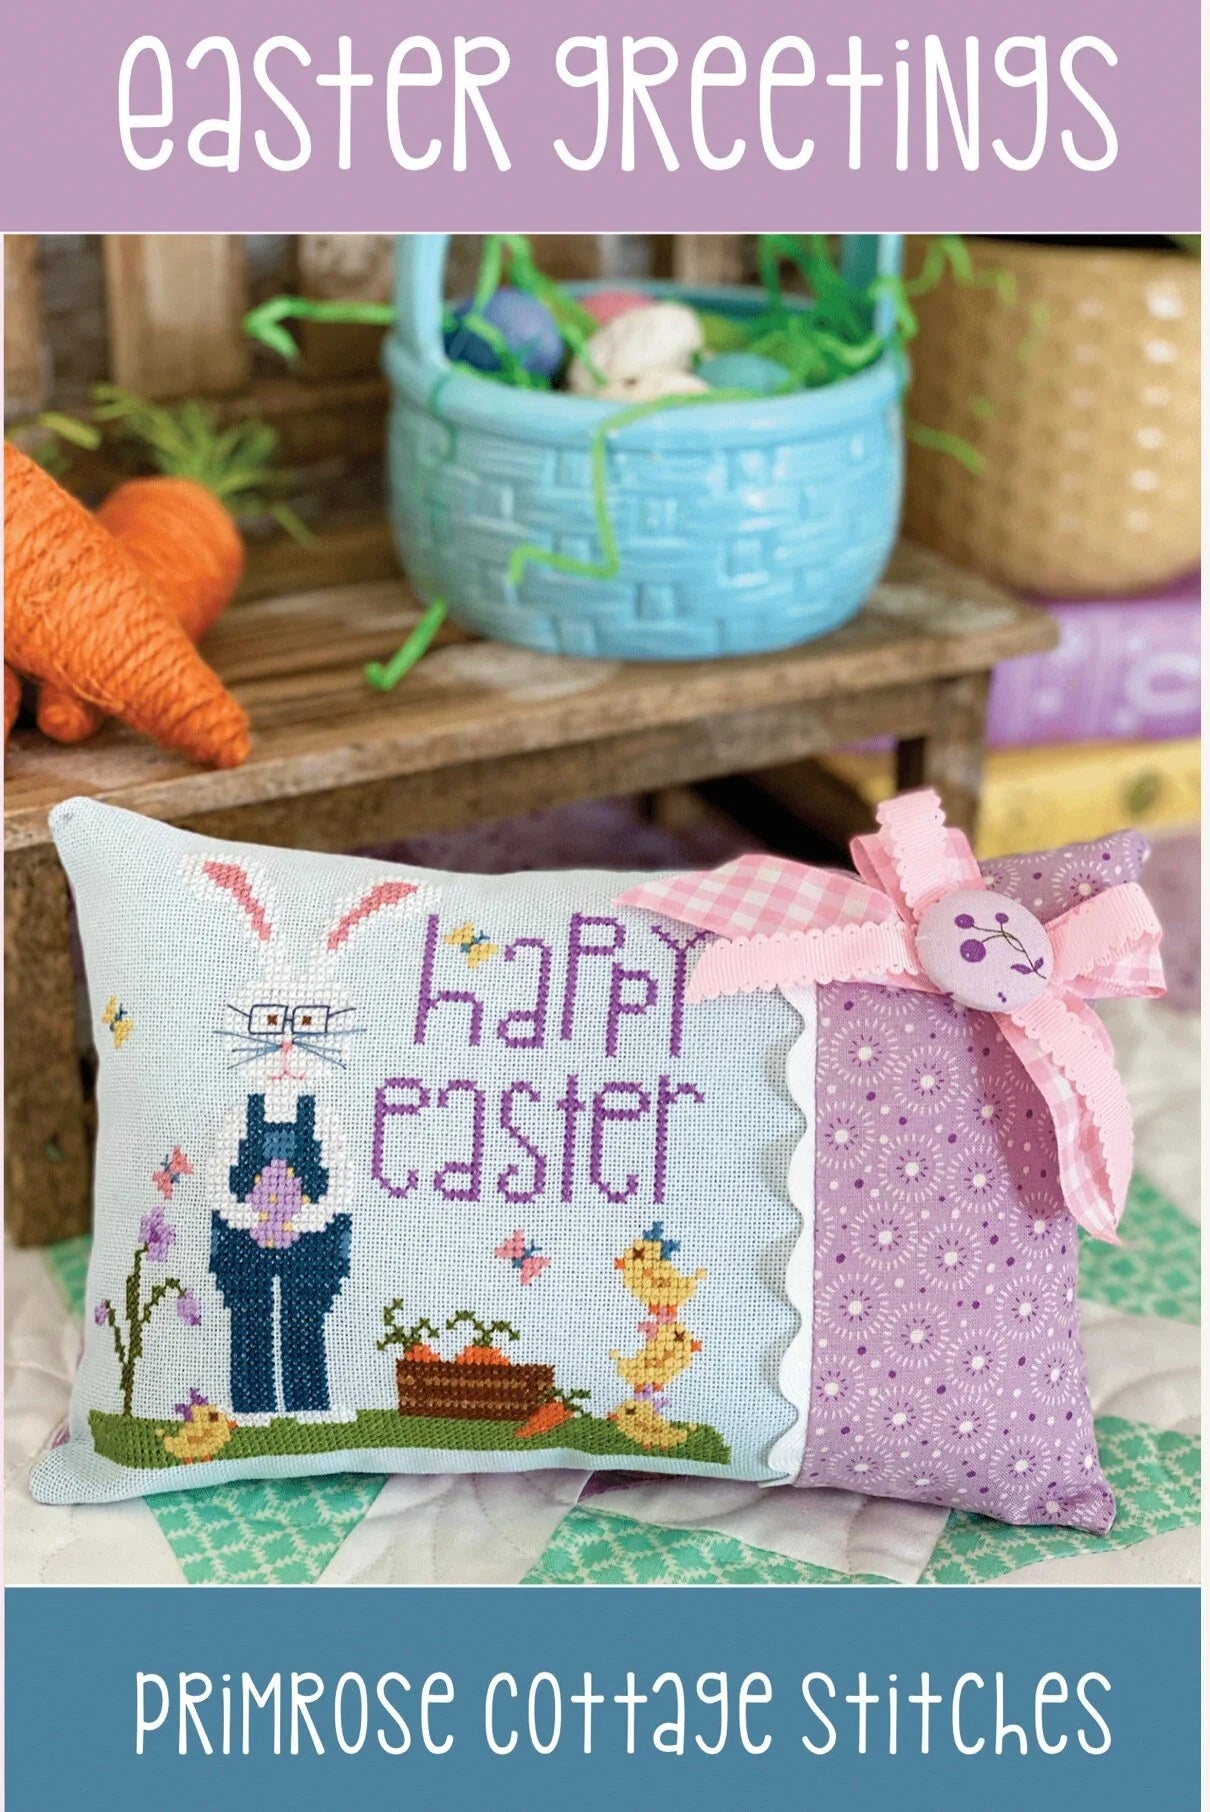 Image of Easter Greetings Cross Stitch Pattern